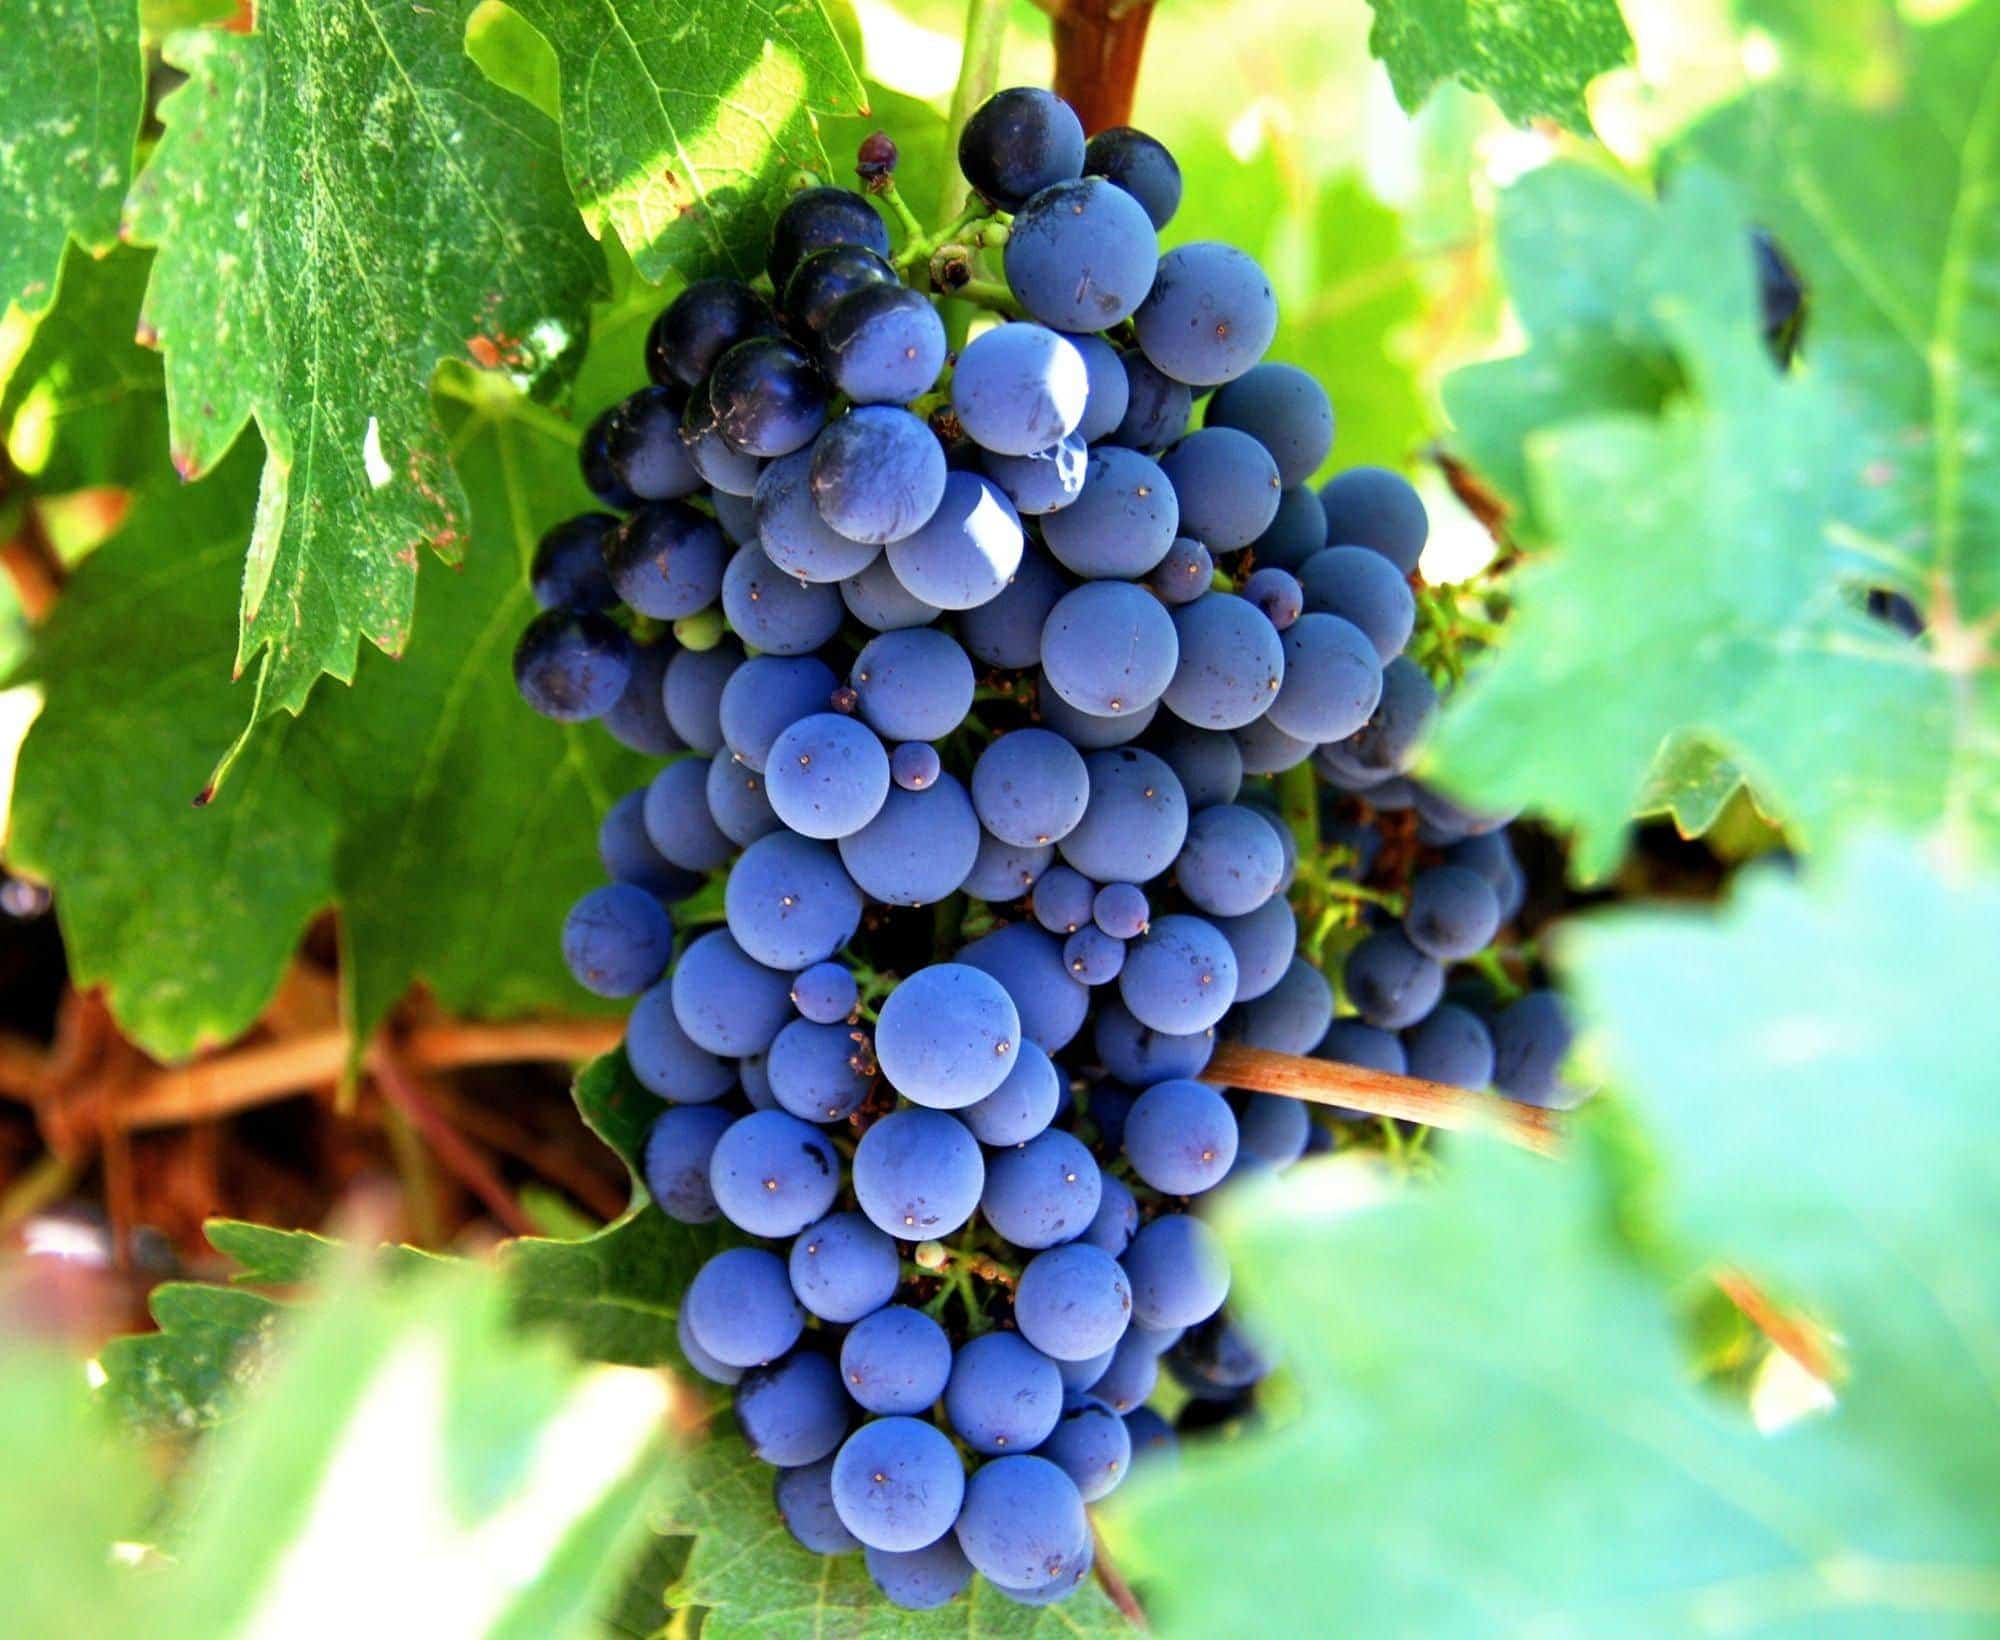 grapes dream meaning, dream about grapes, grapes dream interpretation, seeing in a dream grapes